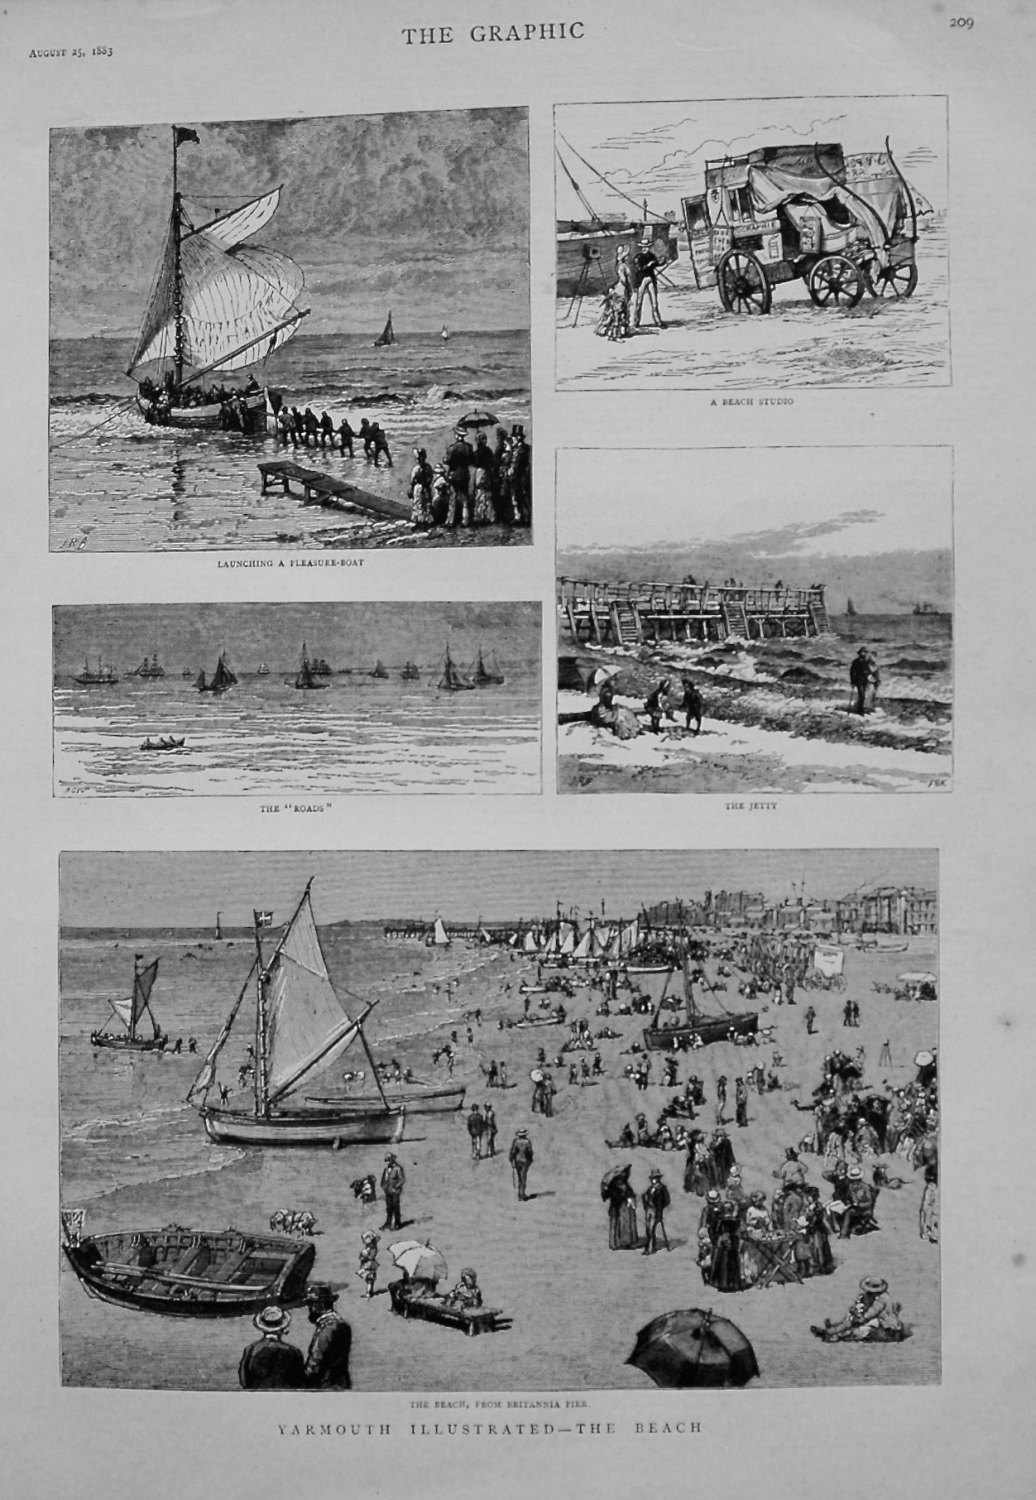 Yarmouth Illustrated - The Beach. 1883